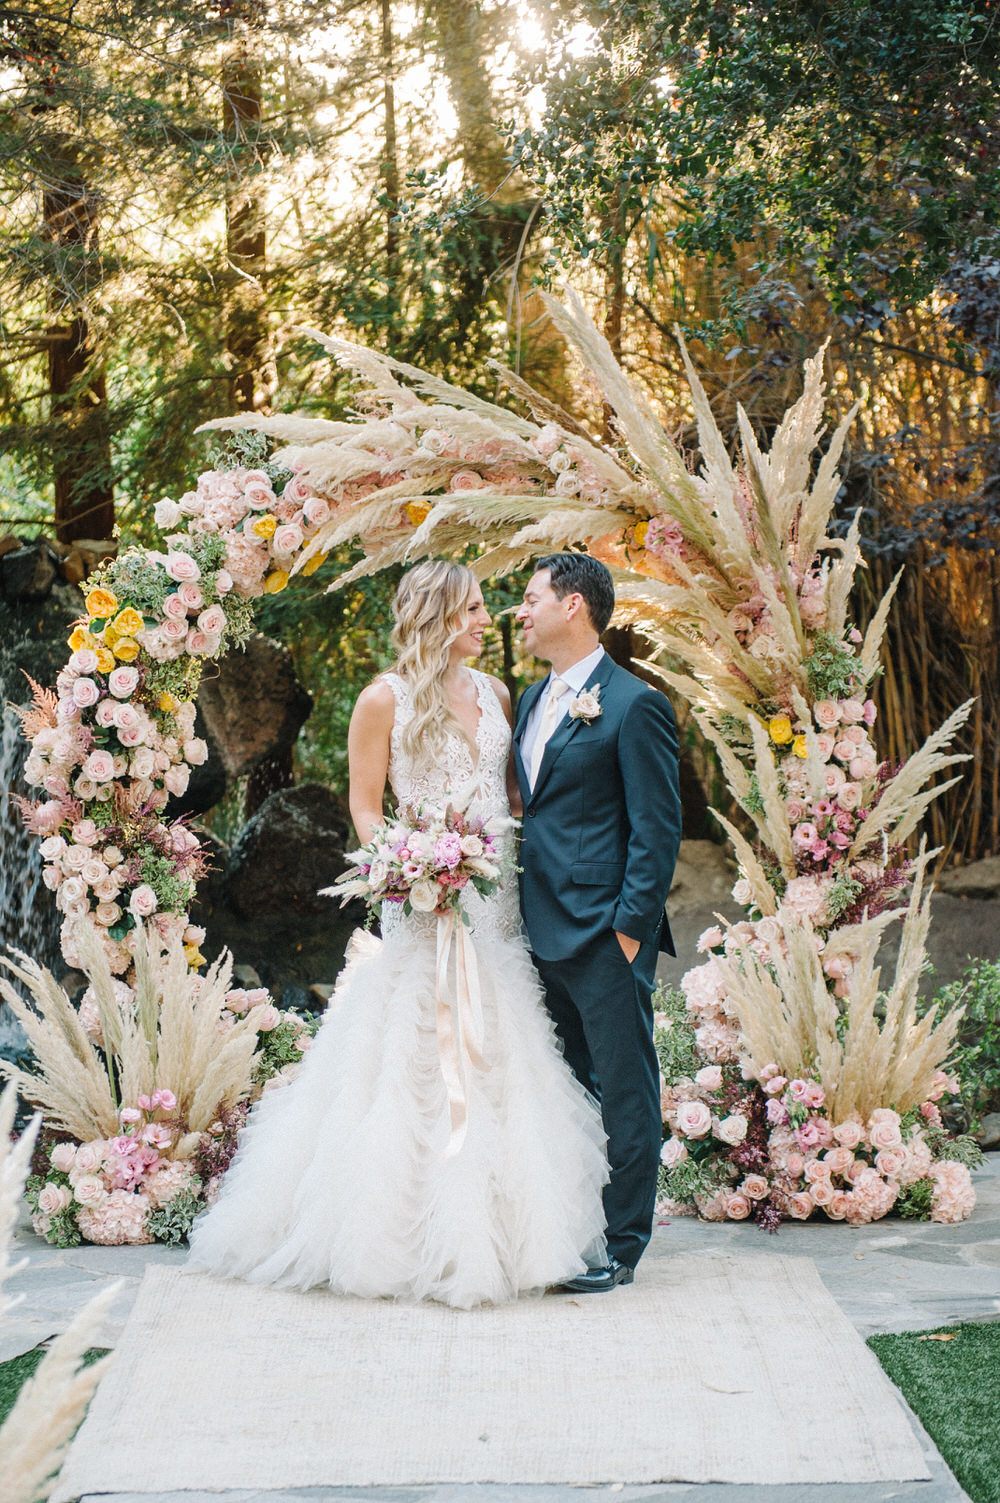 bride and groom smile in front of pampas grass ceremony decor